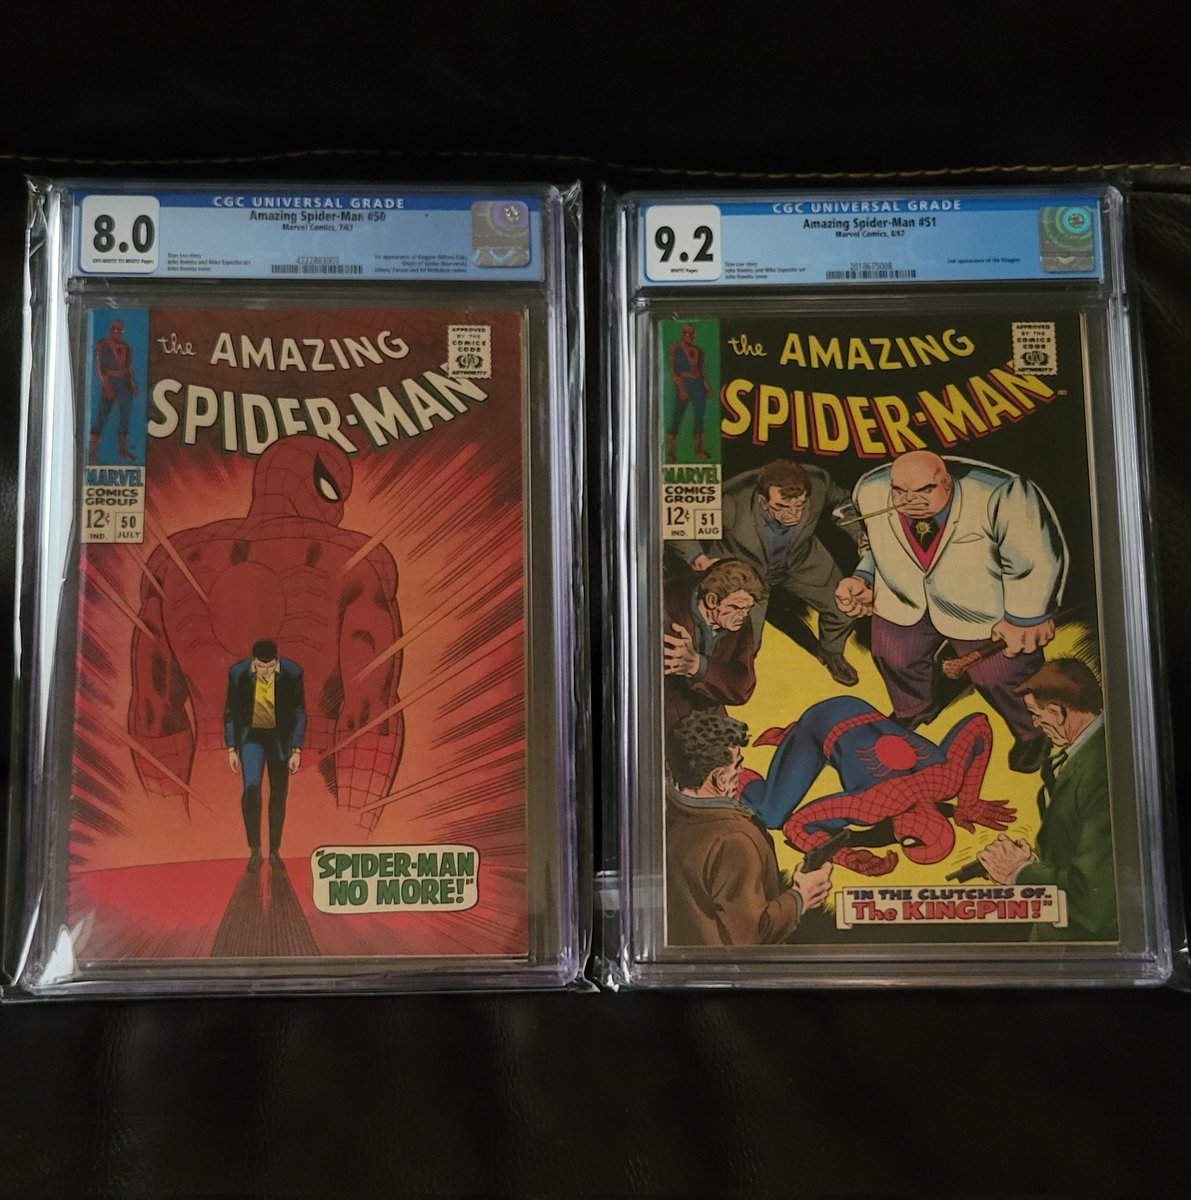 Amazing Spider-Man Issues 50 and 51, featuring the first and second appearance of the Kingpin.

#silveragecomicbooks 
#silverage 
#silveragespideyclassics 
#silveragespiderman 
#silveragecomics 
#amazingspiderman 
#amazingspidermancomics 
#kingpin 
#firstappearance 
#SpiderMan